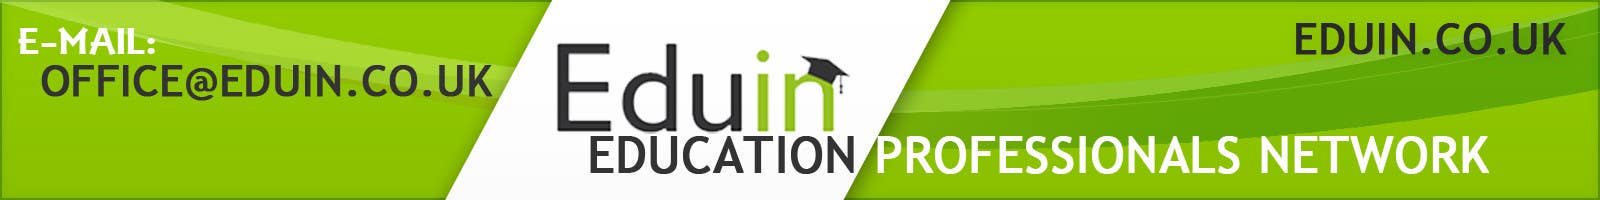 Contest Entry #1 for                                                 Develop a Corporate Identity for Eduin.co.uk Emails
                                            